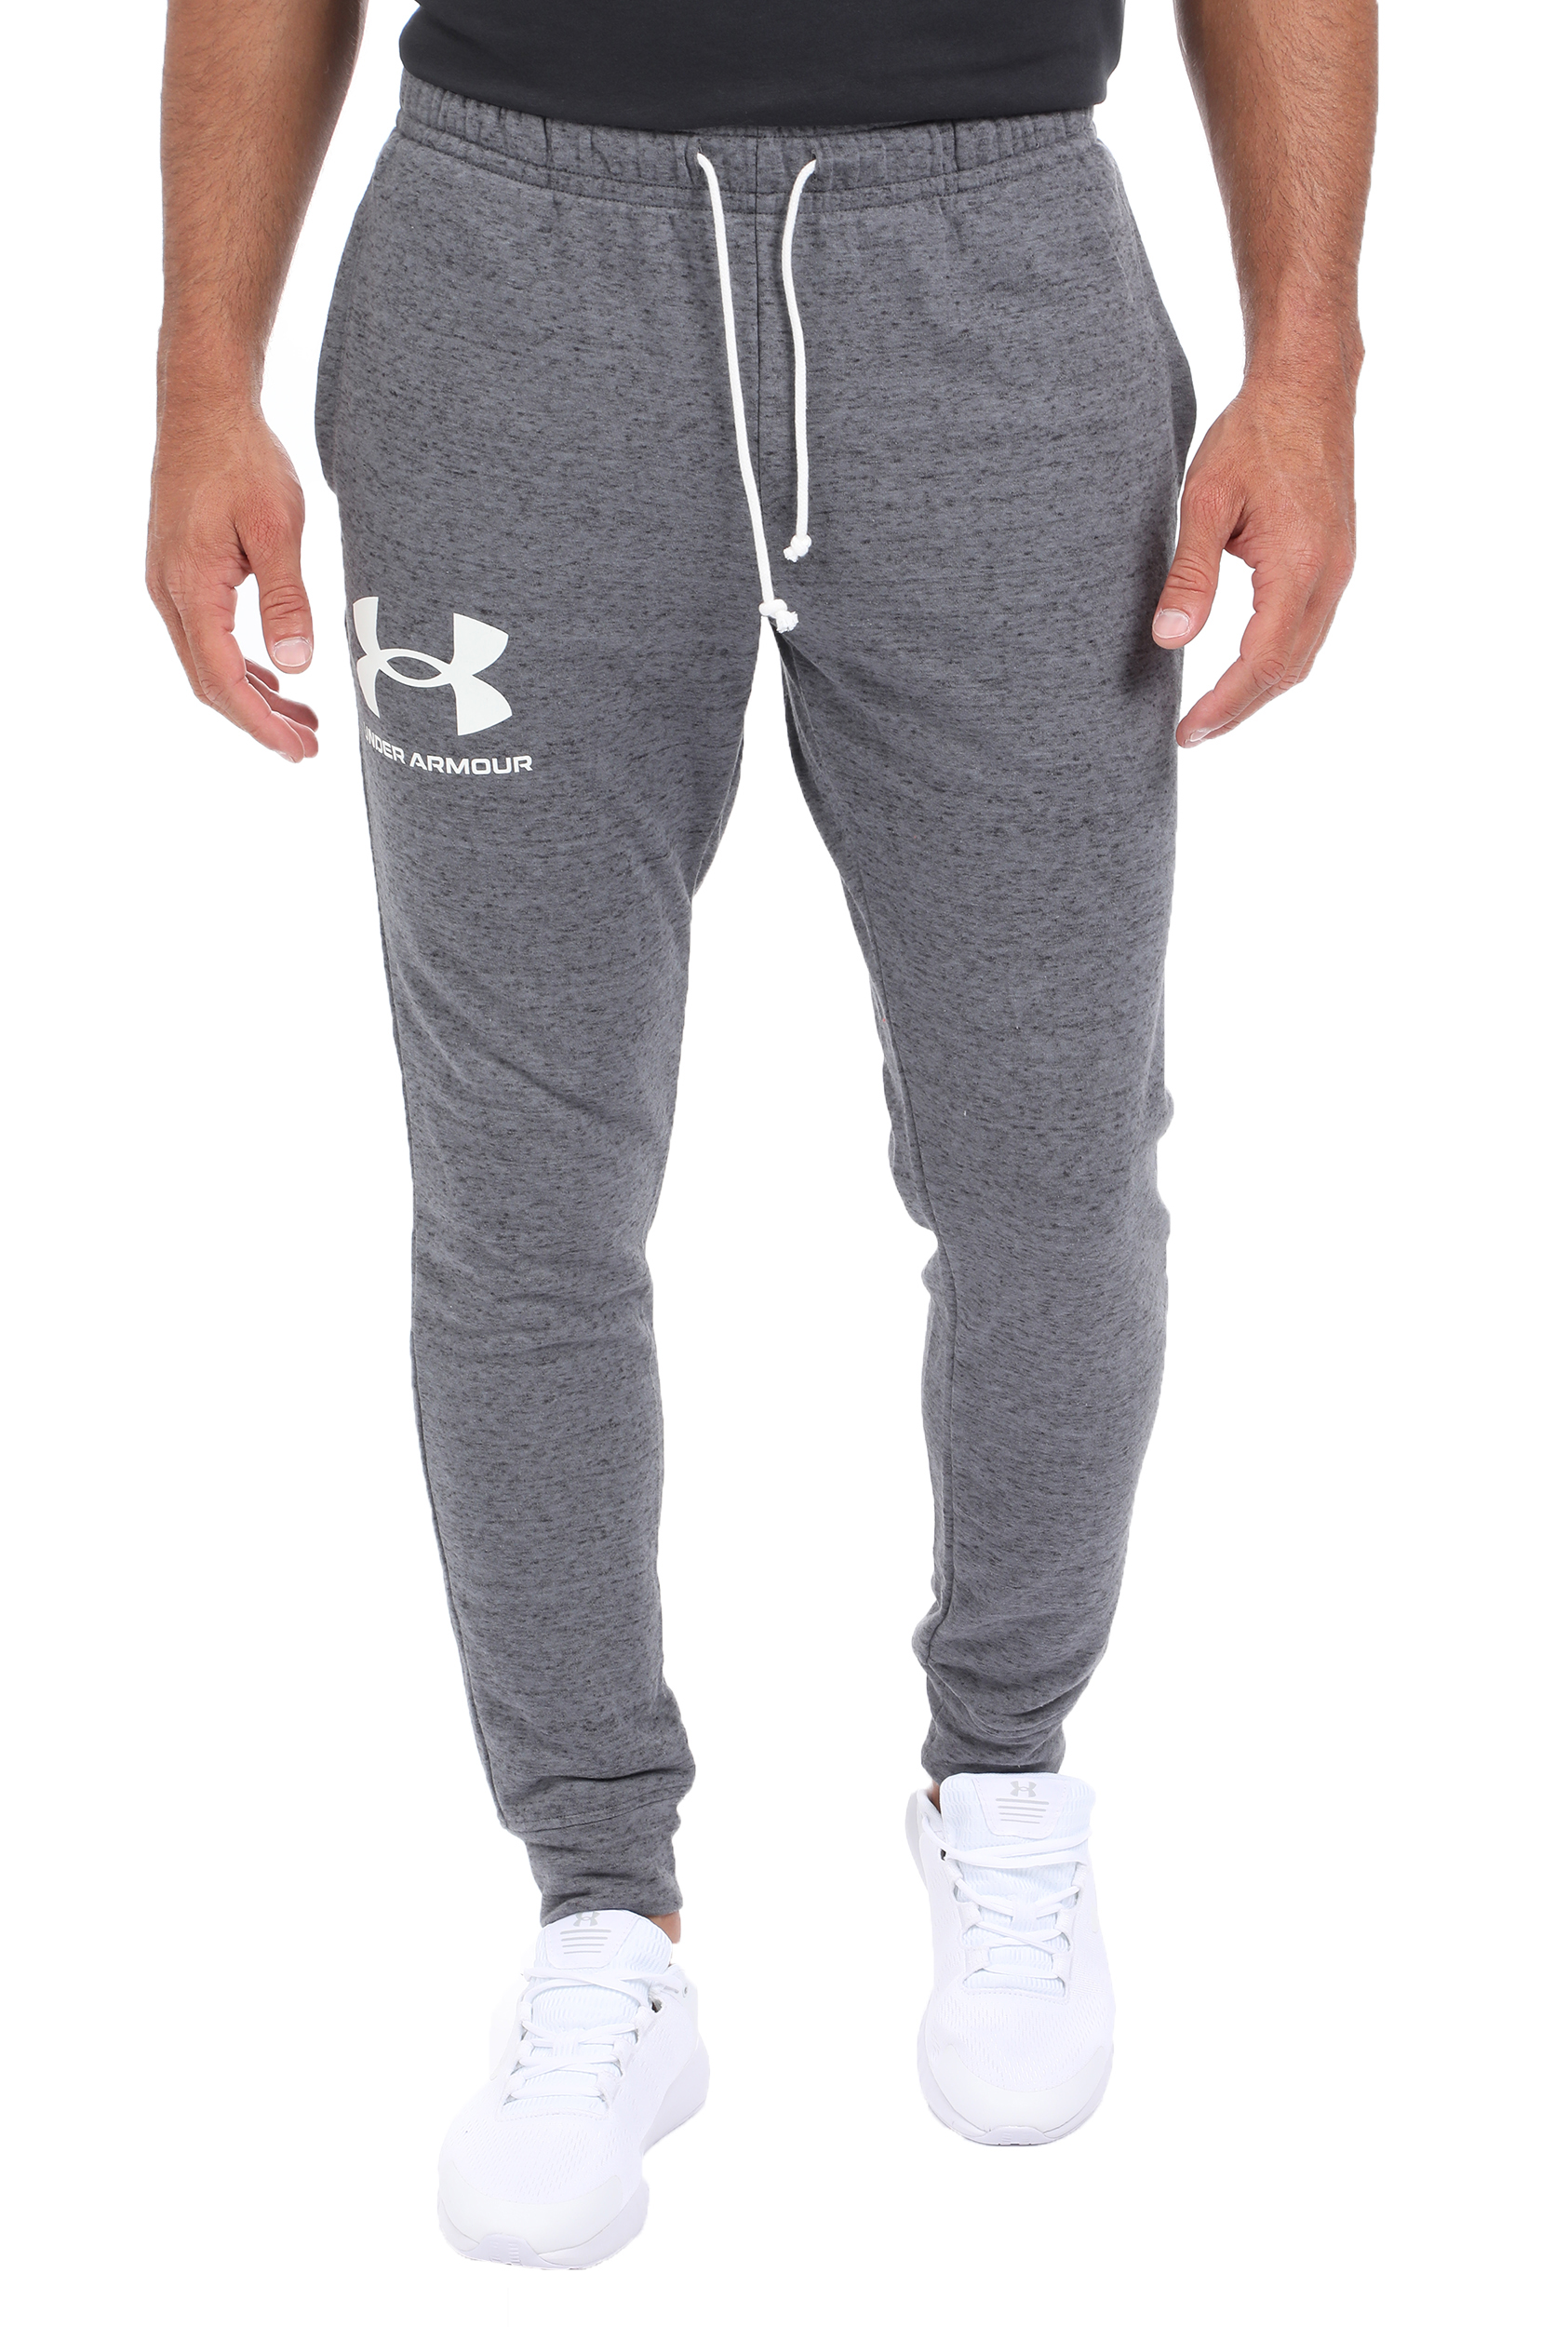 UNDER ARMOUR - Ανδρικό παντελόνι φόρμας UNDER ARMOUR RIVAL TERRY JOGGER γκρι